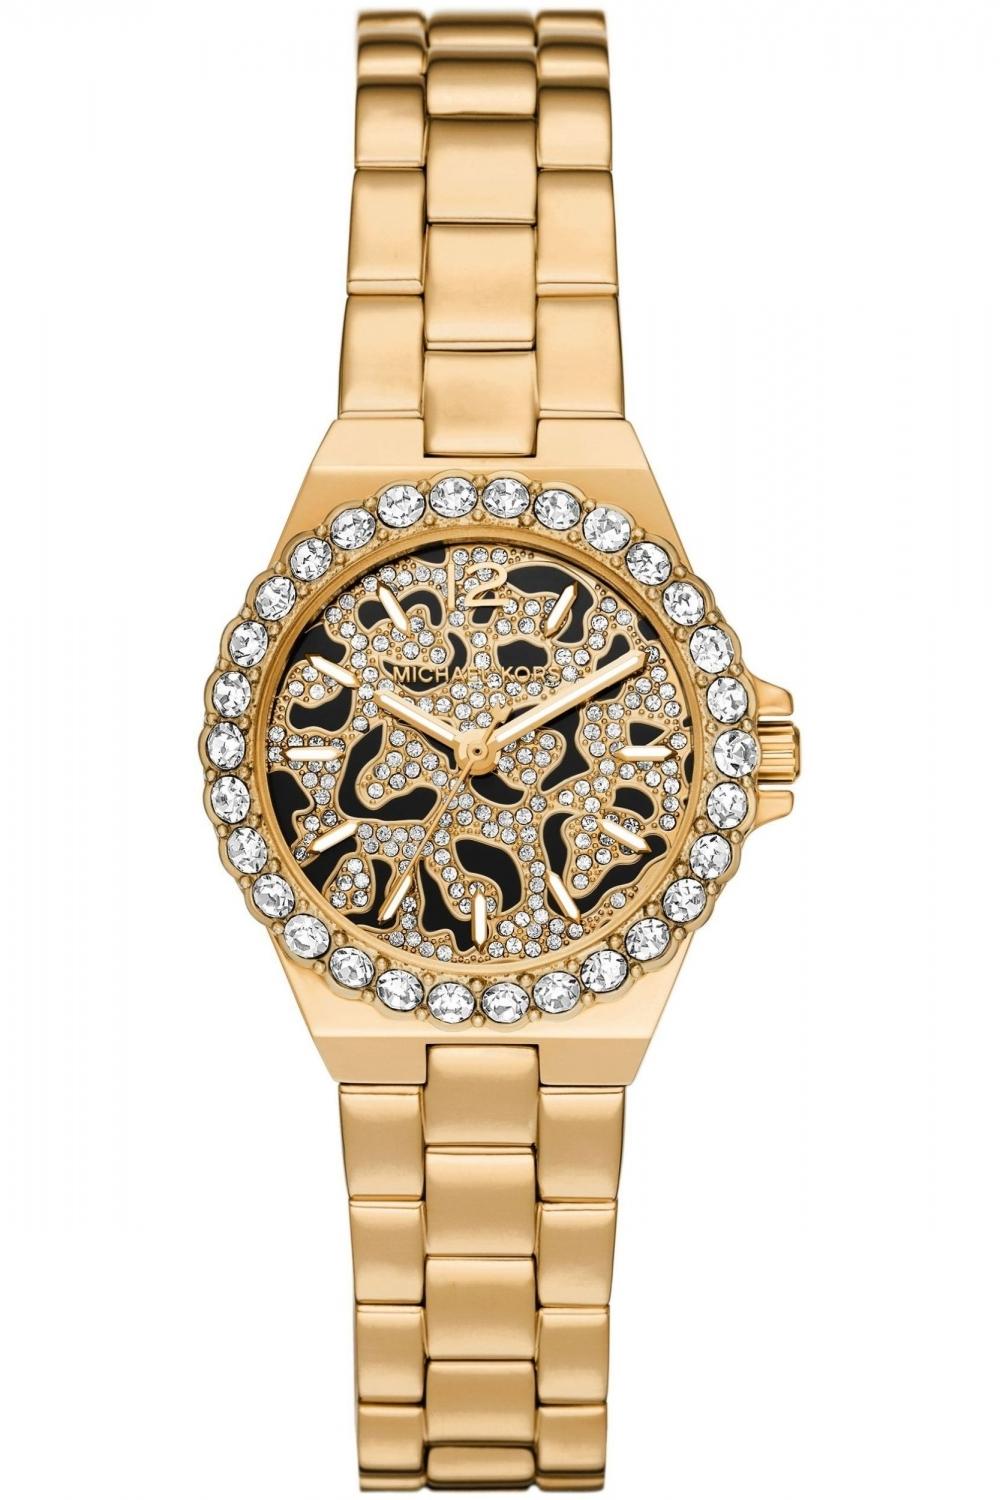 michael kors lennox crystals mk7394 gold case with stainless steel bracelet image1